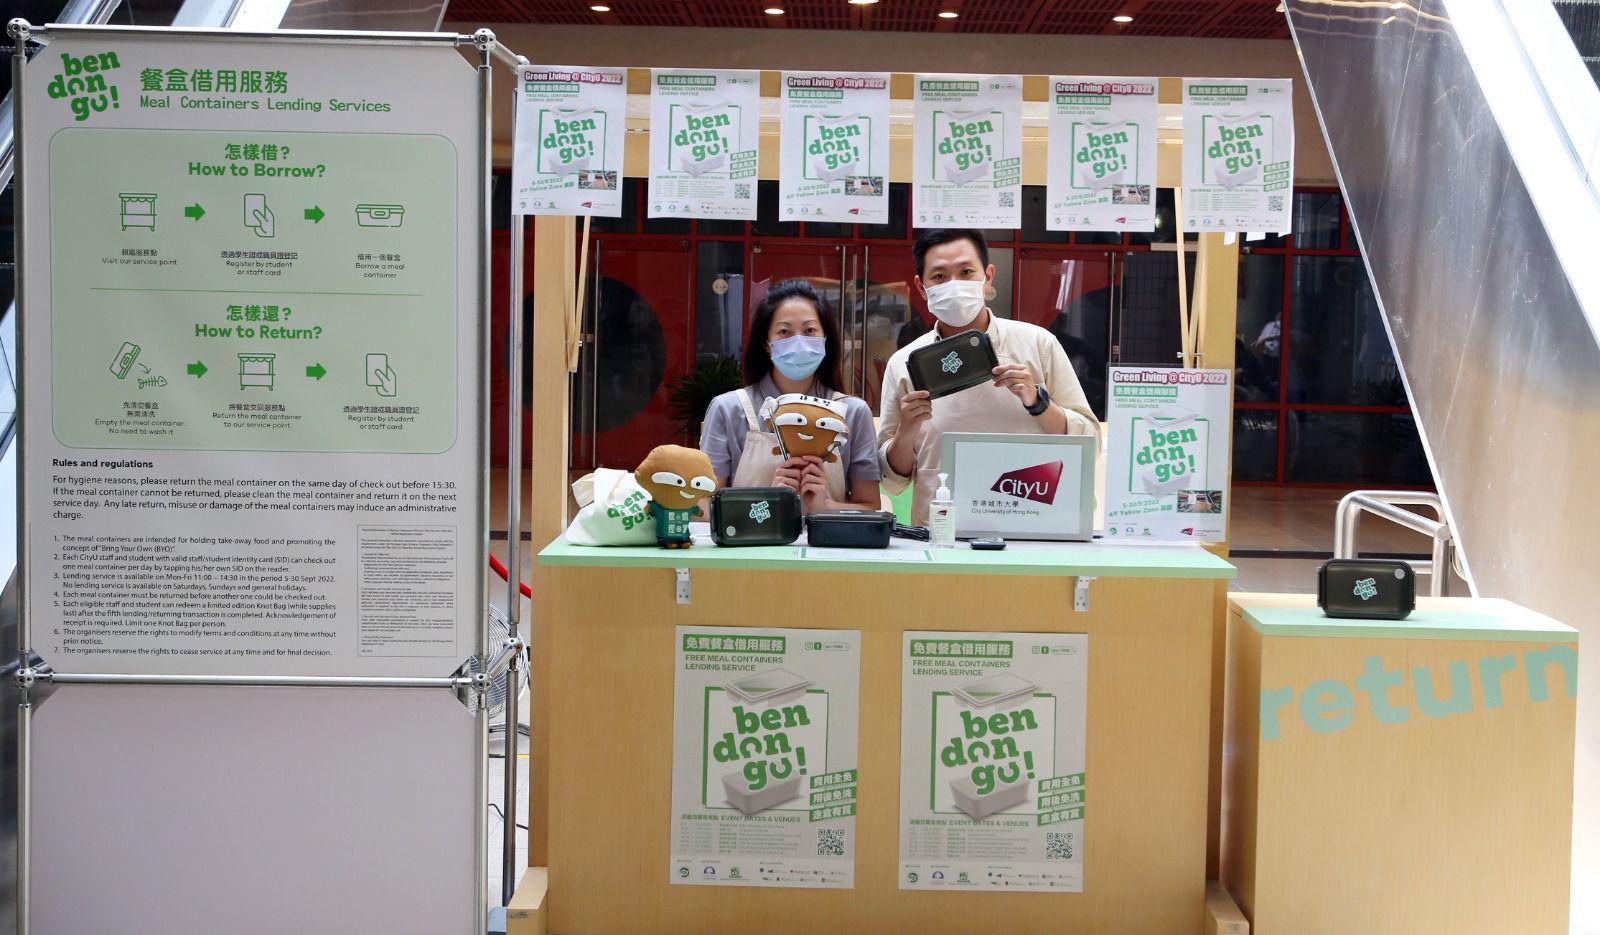 The Environmental Campaign Committee today (September 5) launched the Pilot Scheme for Lending of Reusable Meal Containers, which operates under the "ben don go!" name, in seven universities to promote a plastic-free takeaway culture. Photo shows the first service point at City University of Hong Kong.